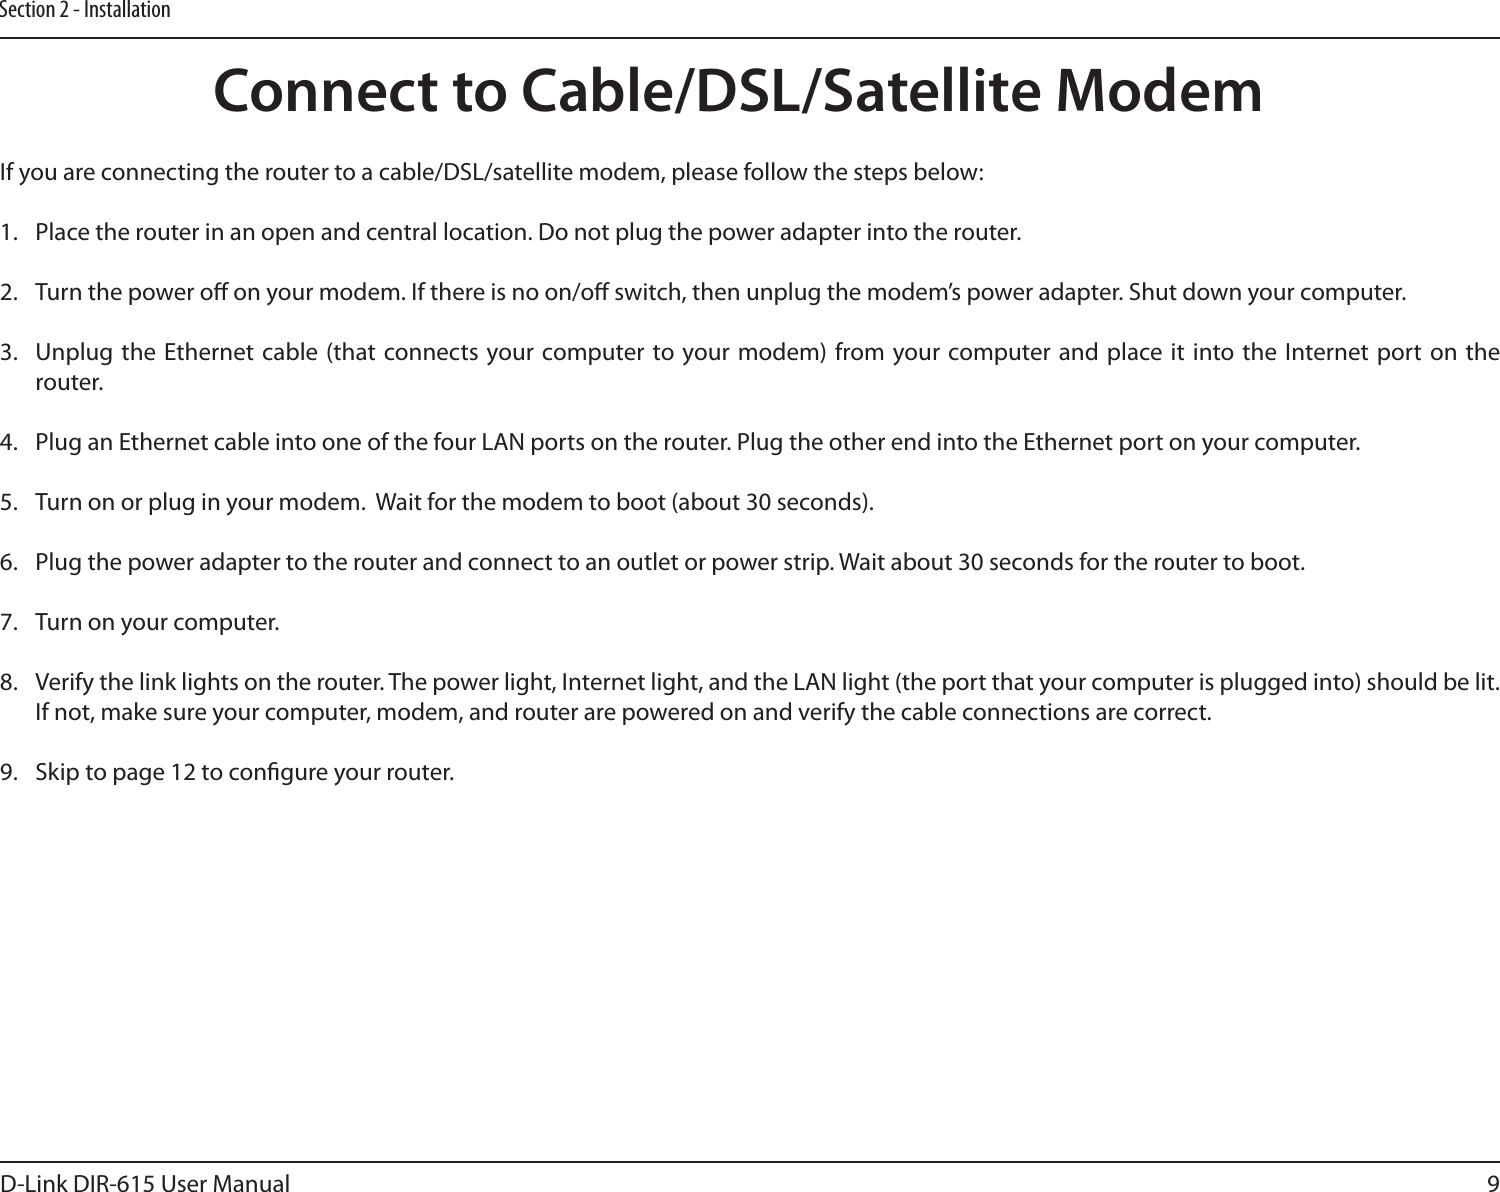 9D-Link DIR-615 User ManualSection 2 - InstallationIf you are connecting the router to a cable/DSL/satellite modem, please follow the steps below:1.  Place the router in an open and central location. Do not plug the power adapter into the router. 2.  Turn the power o on your modem. If there is no on/o switch, then unplug the modem’s power adapter. Shut down your computer.3.  Unplug the Ethernet cable (that  connects your computer to  your modem) from your computer and  place it into the Internet port  on the router.  4.  Plug an Ethernet cable into one of the four LAN ports on the router. Plug the other end into the Ethernet port on your computer.5.  Turn on or plug in your modem.  Wait for the modem to boot (about 30 seconds). 6.  Plug the power adapter to the router and connect to an outlet or power strip. Wait about 30 seconds for the router to boot. 7.  Turn on your computer. 8.  Verify the link lights on the router. The power light, Internet light, and the LAN light (the port that your computer is plugged into) should be lit. If not, make sure your computer, modem, and router are powered on and verify the cable connections are correct. 9.  Skip to page 12 to congure your router. Connect to Cable/DSL/Satellite Modem